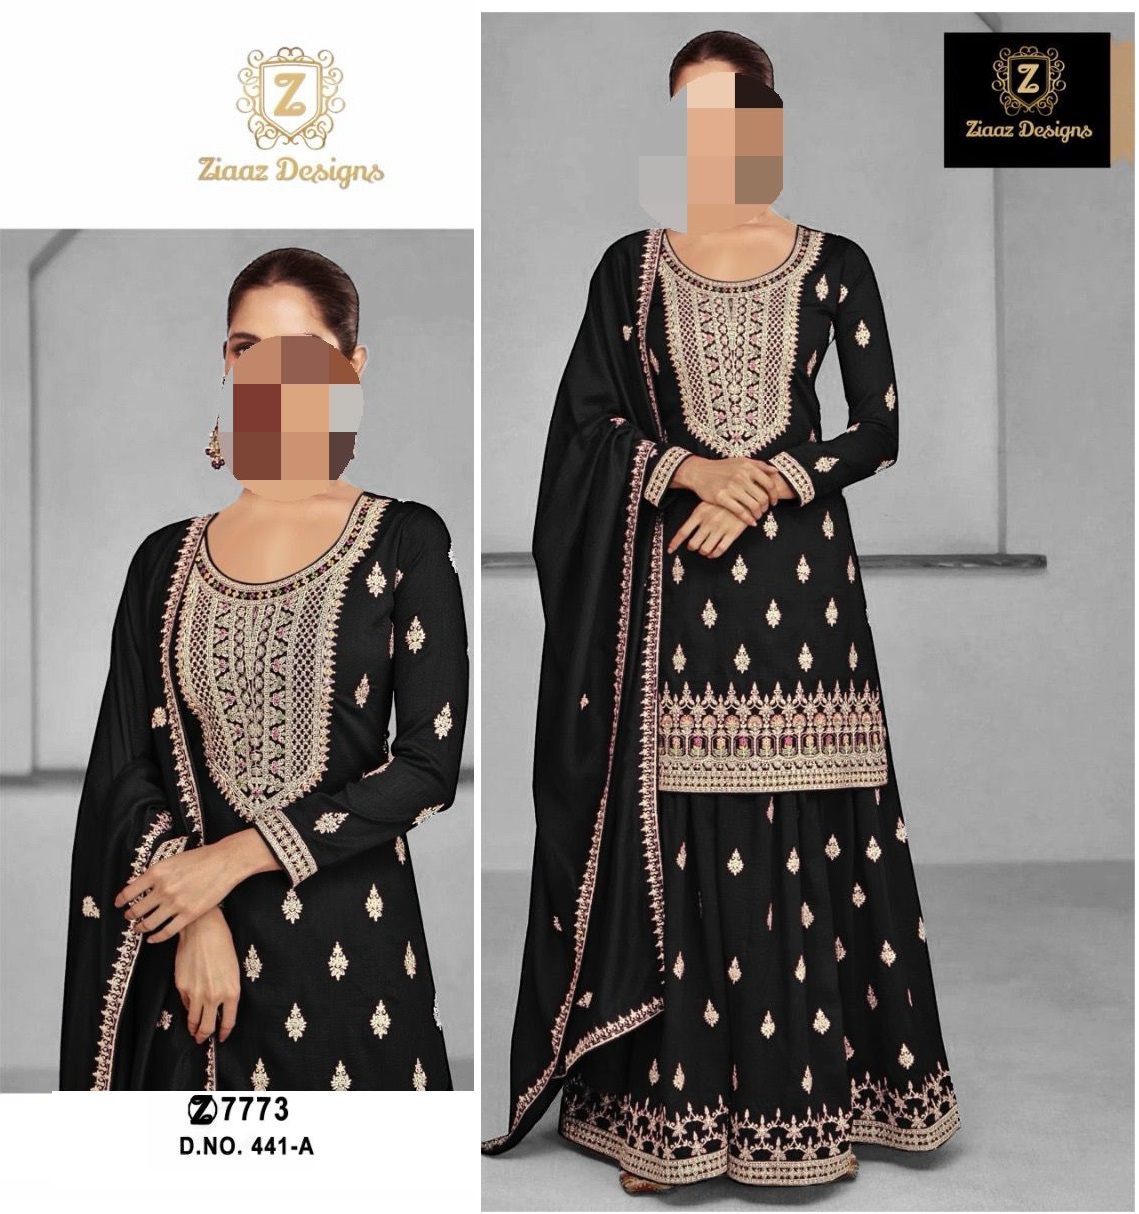 ZIAAZ DESIGNS 441 A PAKISTANI SUITS IN INDIA